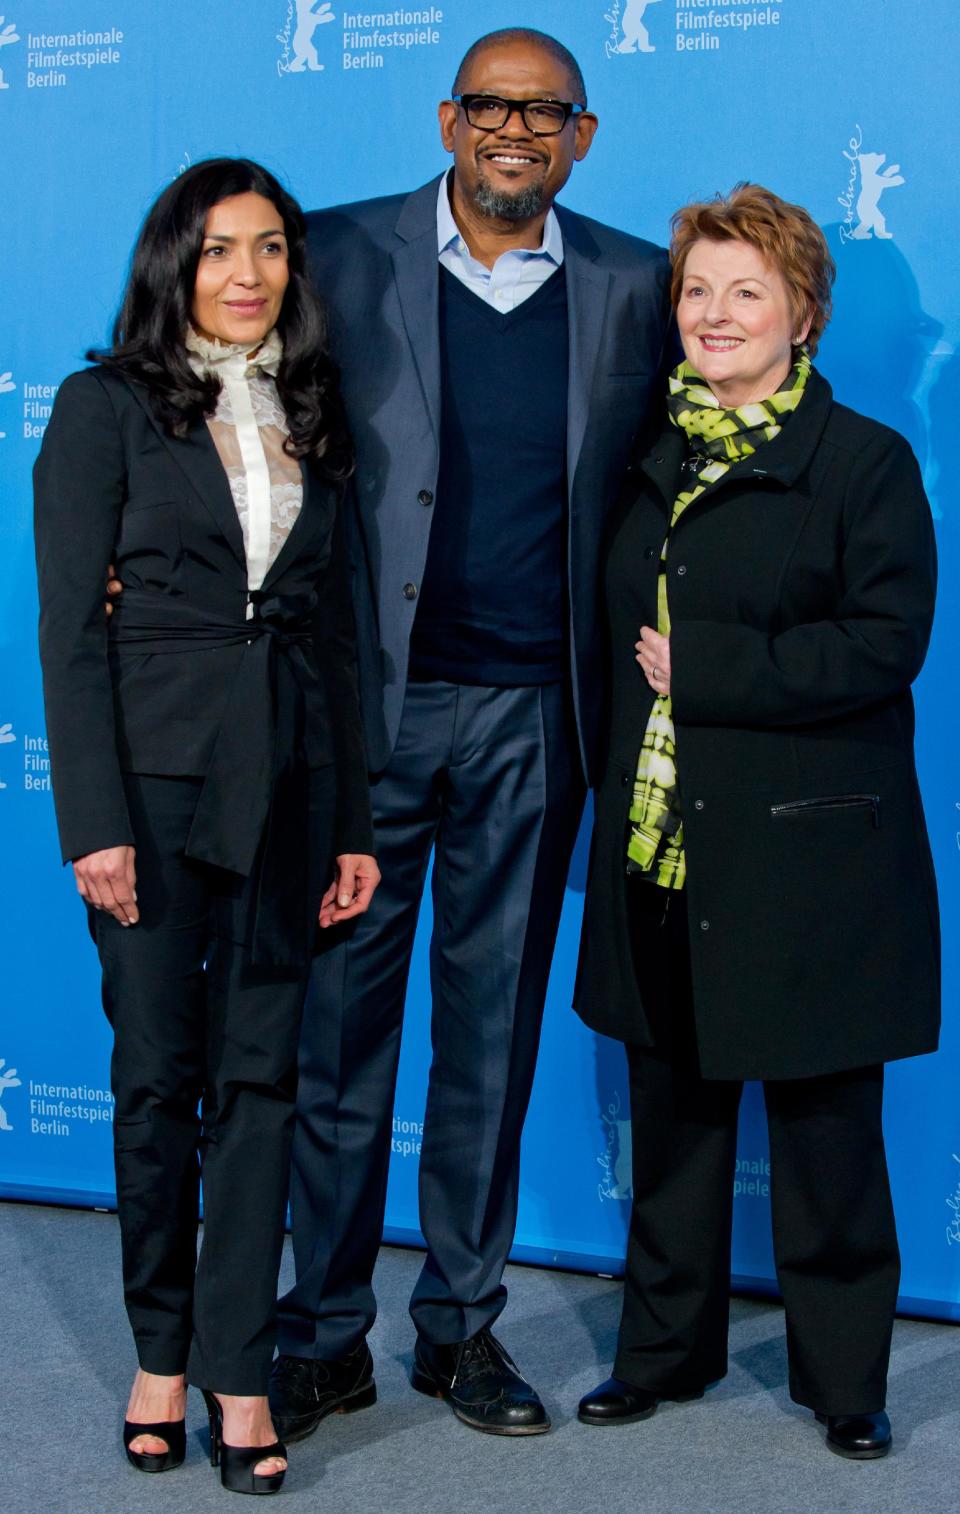 From left, actors Dolores Heredia, Forest Whitaker and actress Brenda Blethyn pose for photographers at the photo call for the film 'Two Men in Town' during the 64th Berlinale International Film Festival, on Friday Feb. 7, 2014, in Berlin. (AP Photo/dpa, Tim Brakemeier)